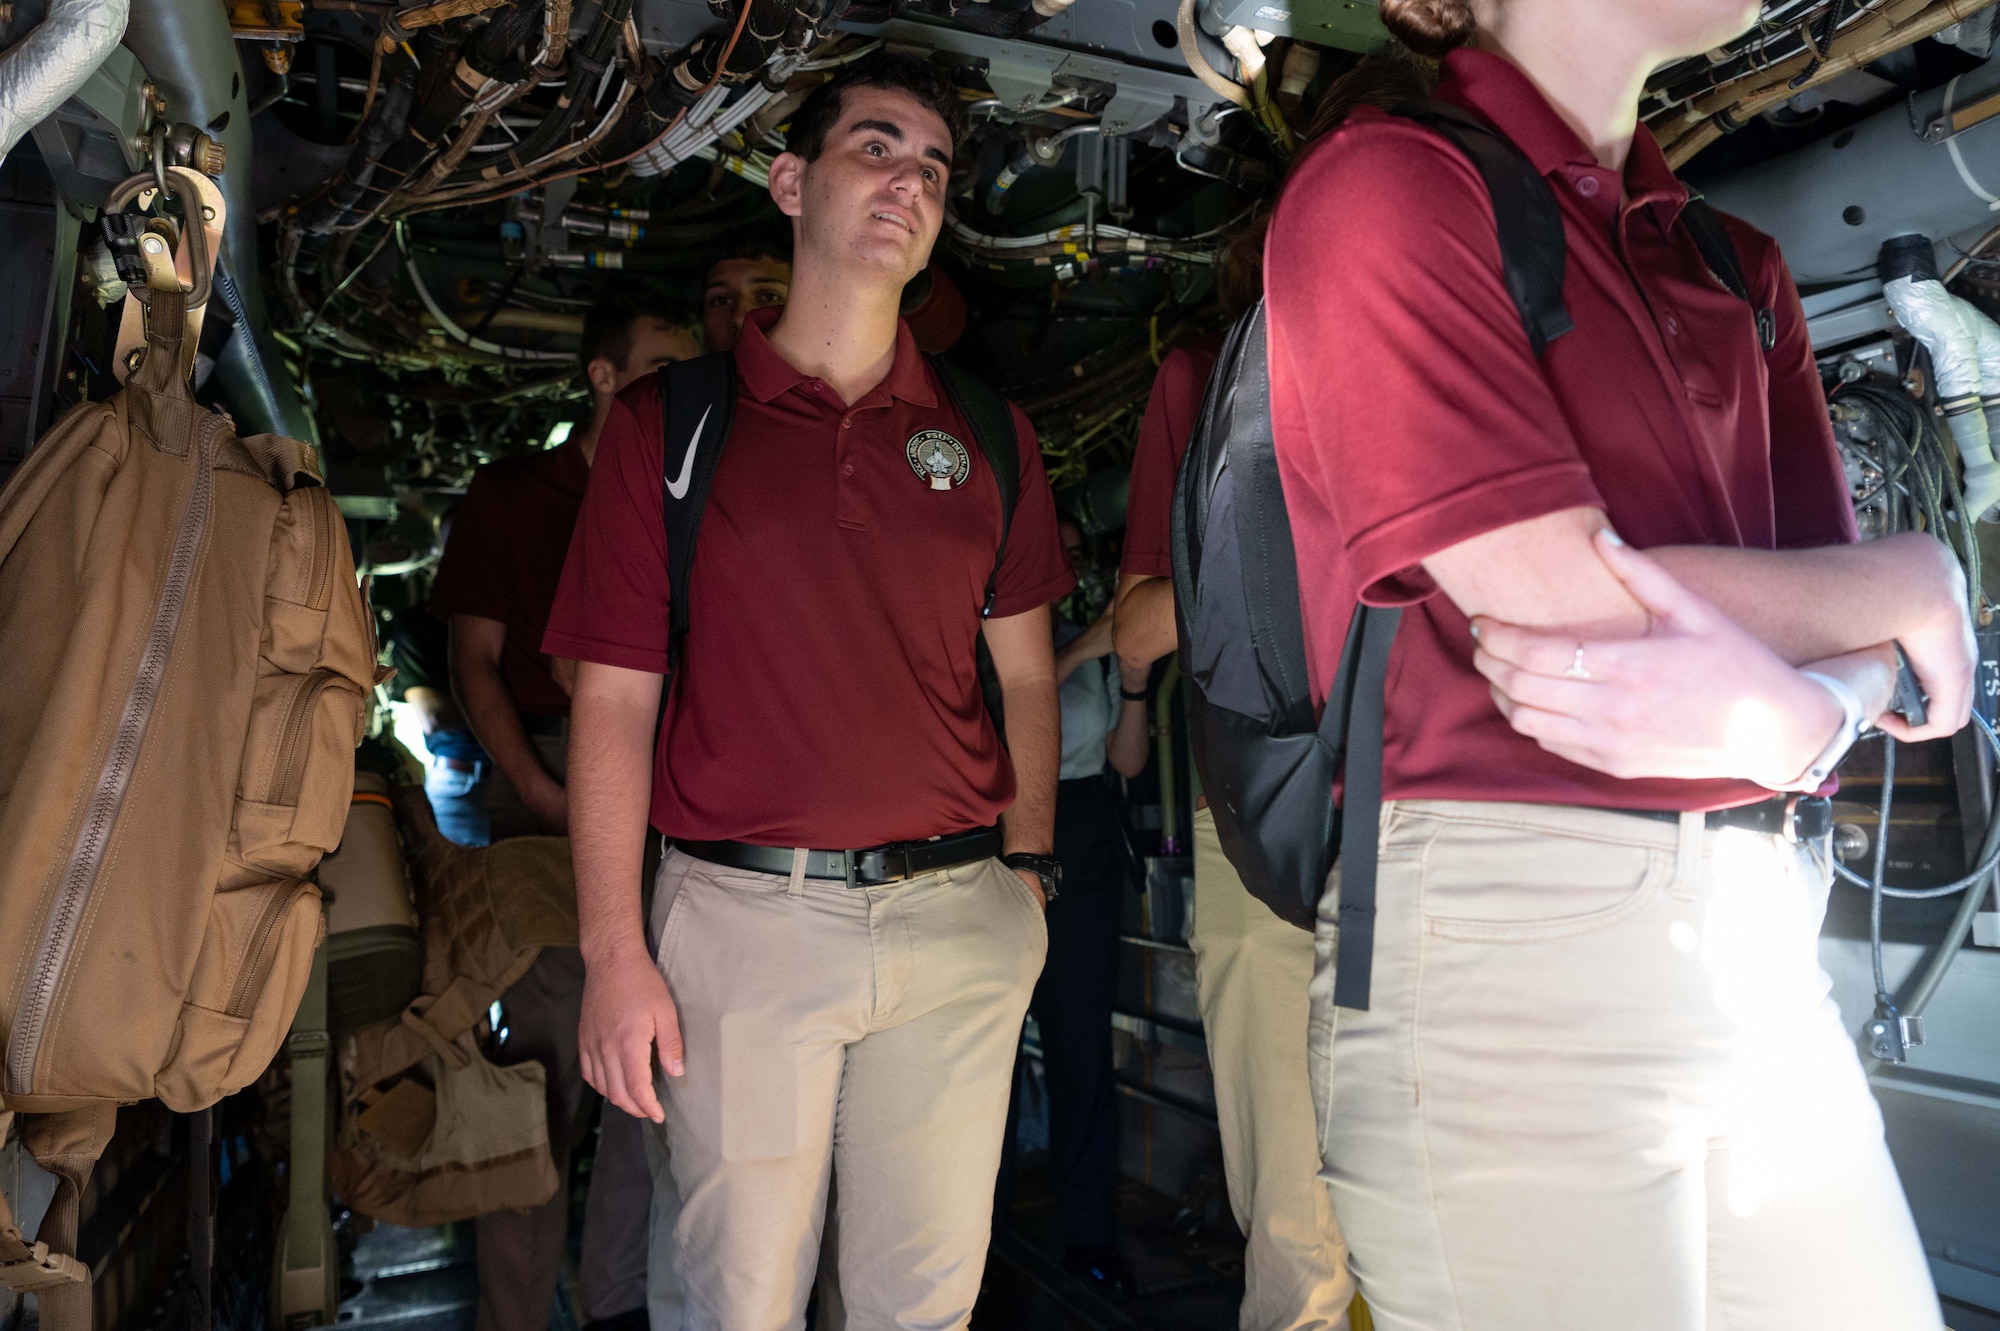 ROTC cadets from Florida State University and Florida A&M University meet with Air Commandos and see different equipment employed by them for mission requirements, during an event at the FSU campus Sept. 23, 2021. Students were able to inspect and try on equipment used by special tactics officers. (U.S. Air Force photo by Staff Sgt. Rito Smith)